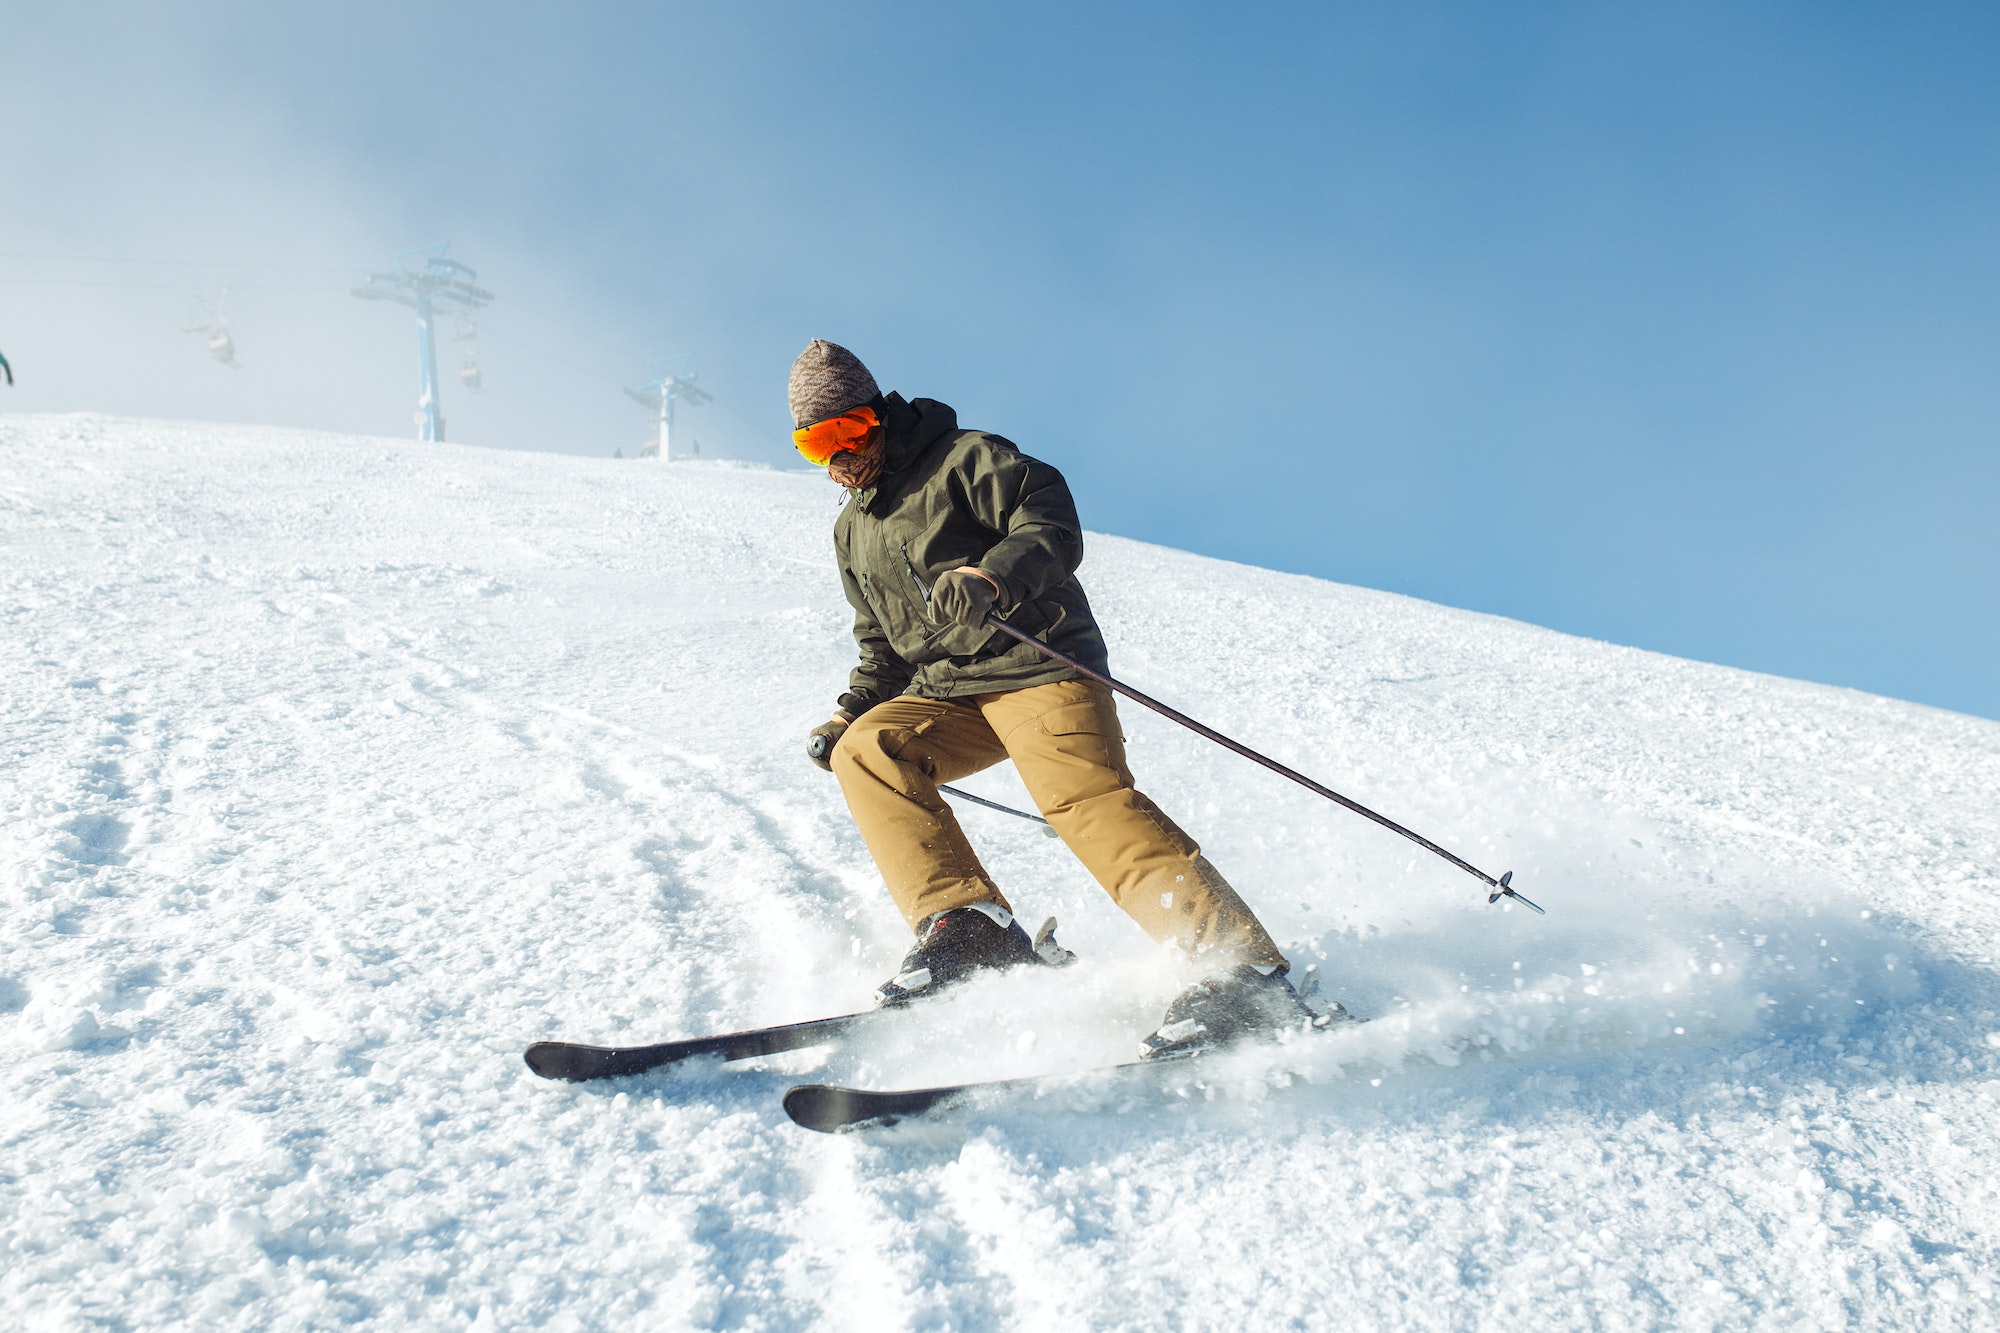 Man skiing in the mountains. Skiing in the snowy mountains, Winter is coming. Active lifestyle.